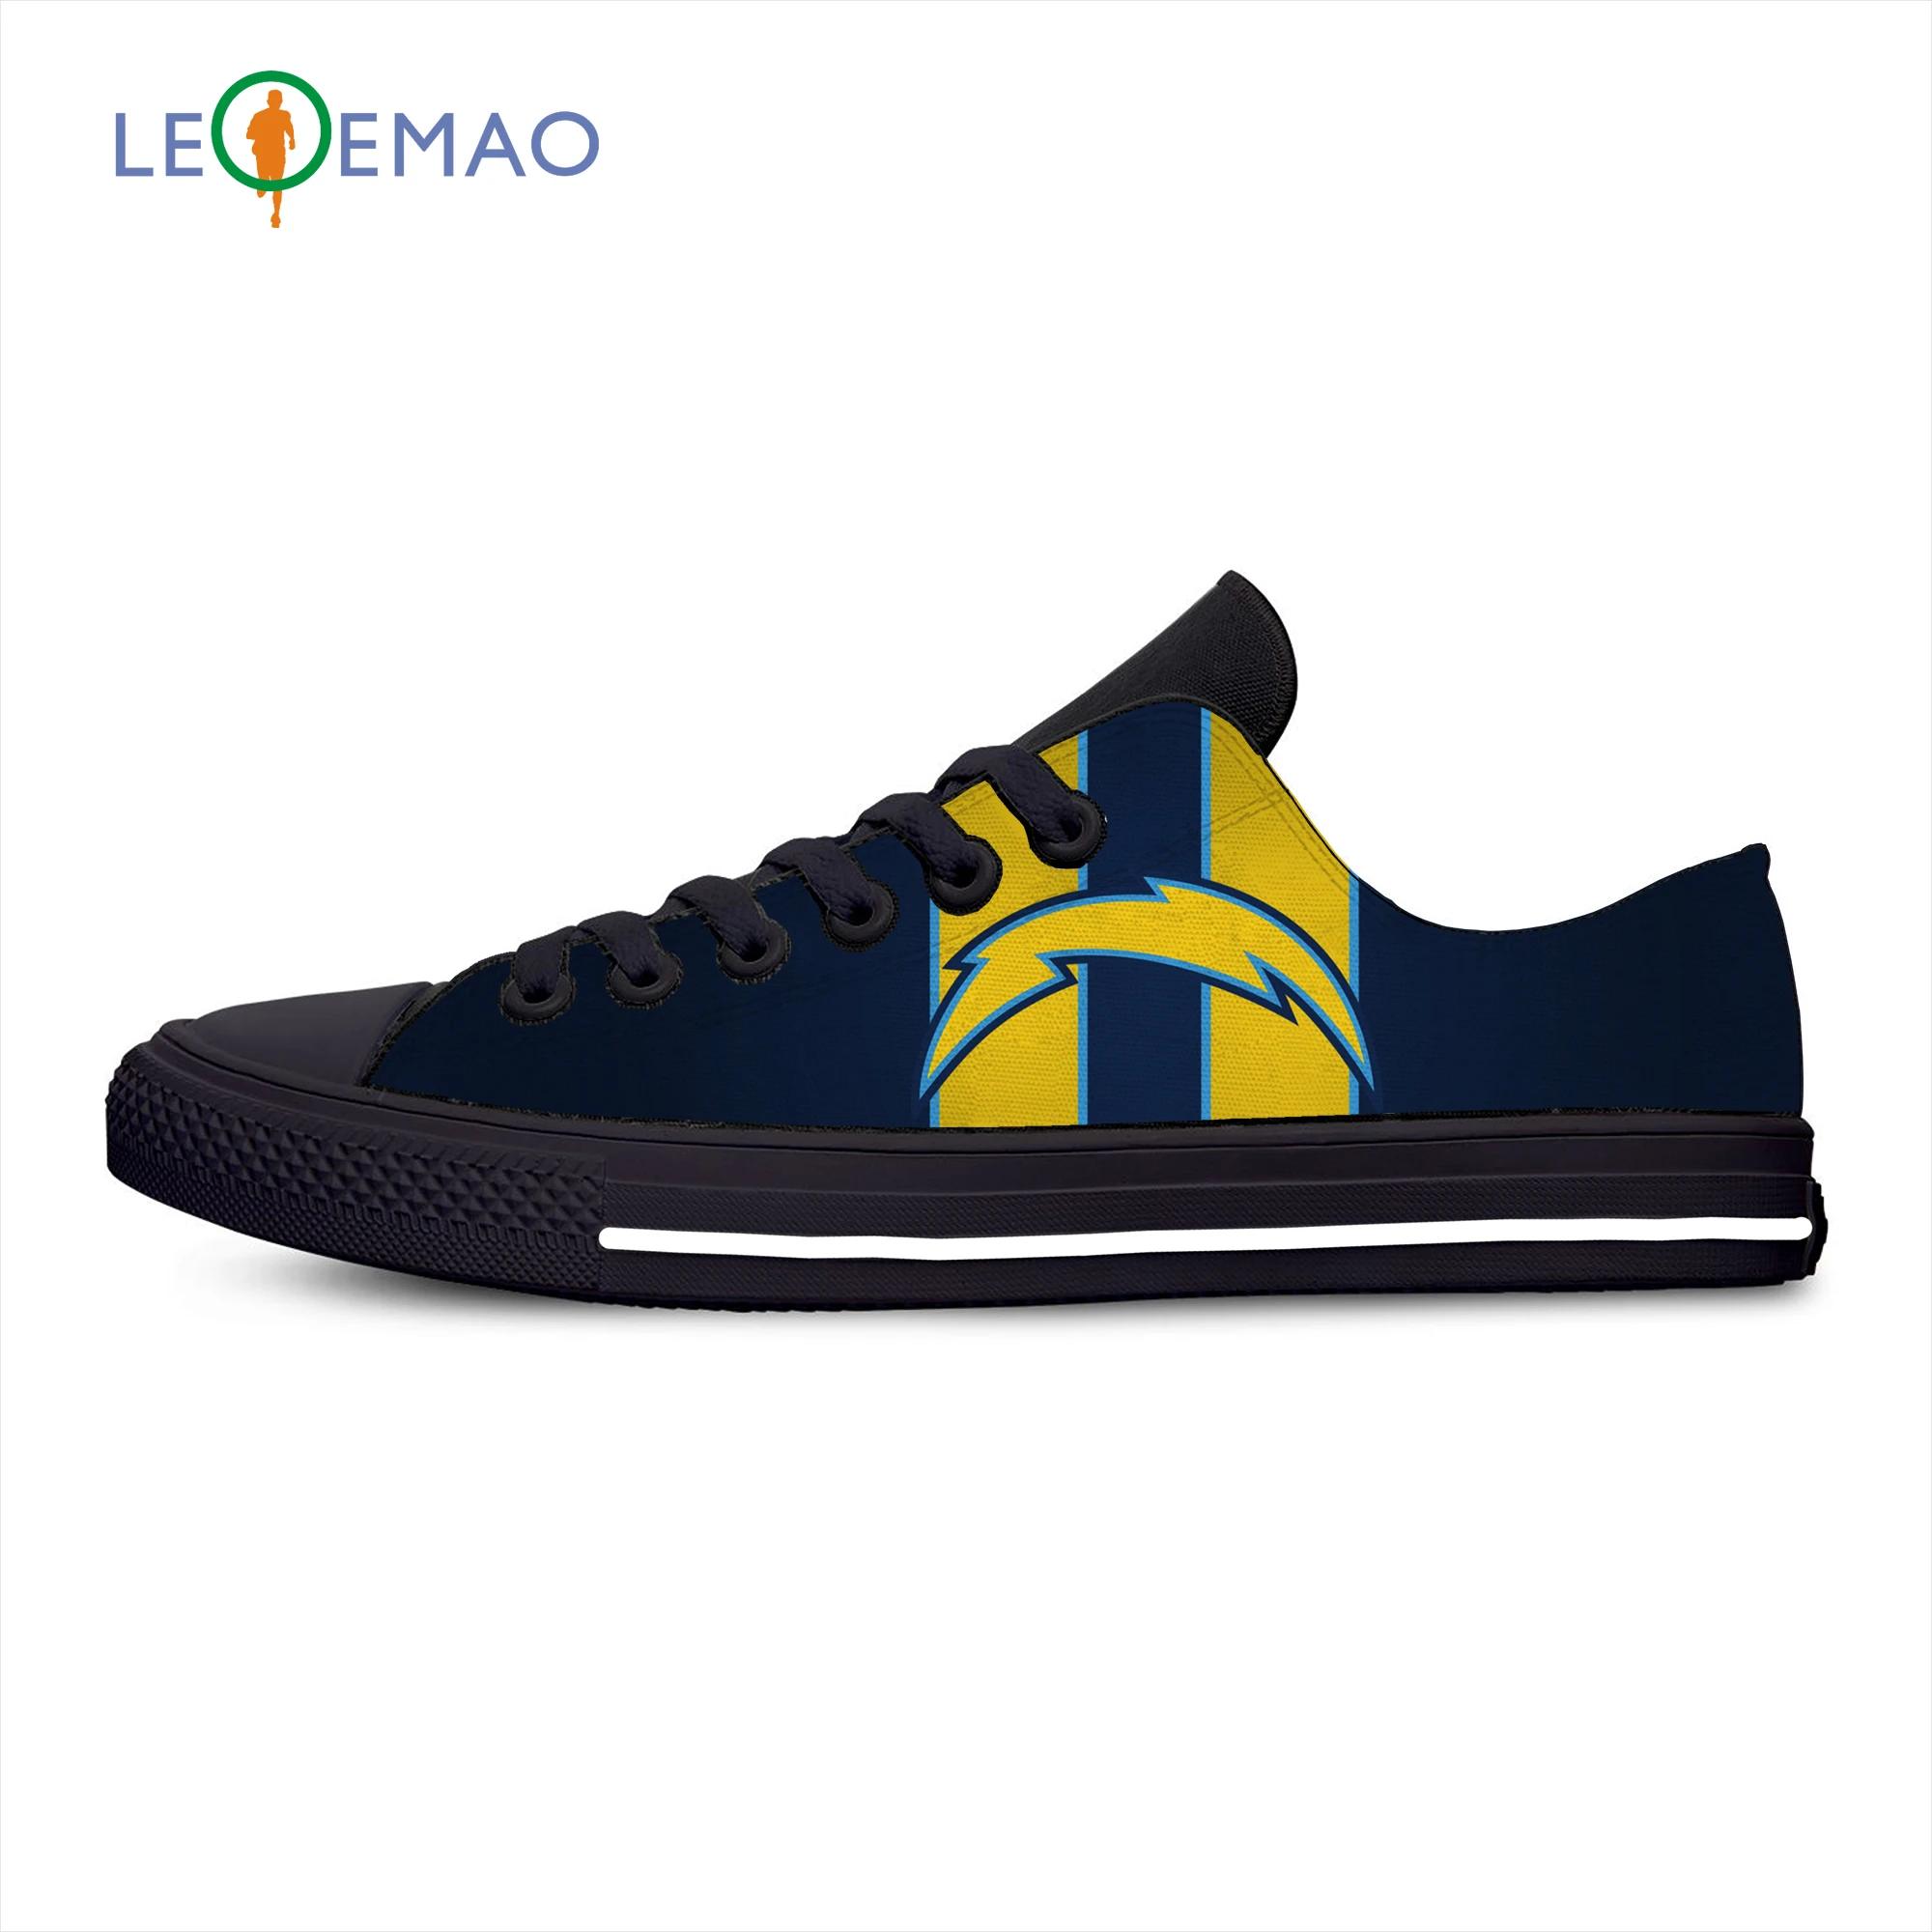 

New Men's women San Diego 2019 bowl LIV Champions fashion Lightweight low Top Breathable Sneakers for Chargers fans gift